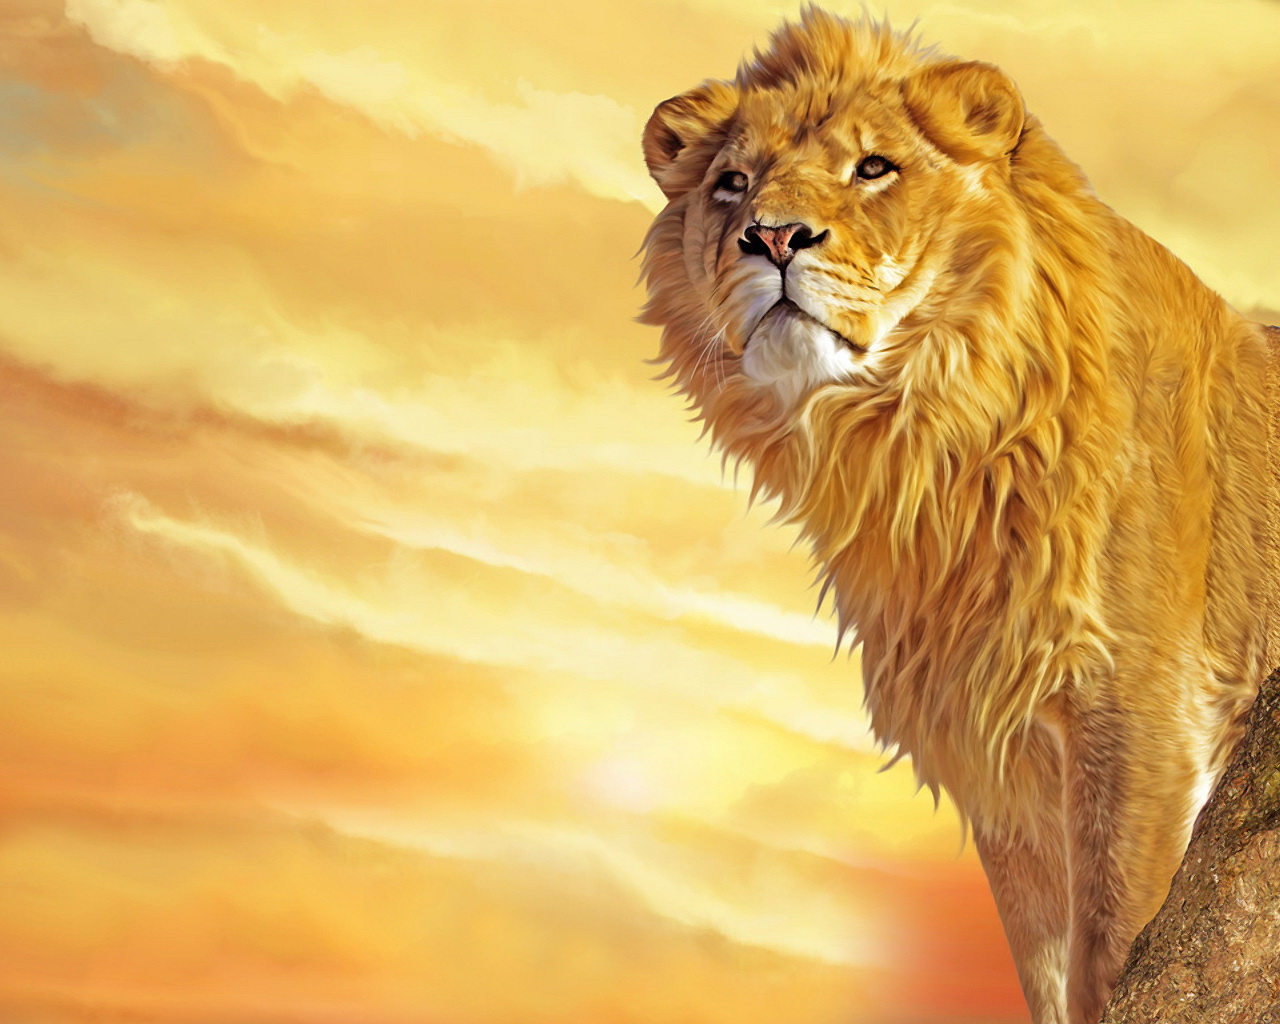 24 Lion Wallpapers For Desktop Quotes Wallpapers